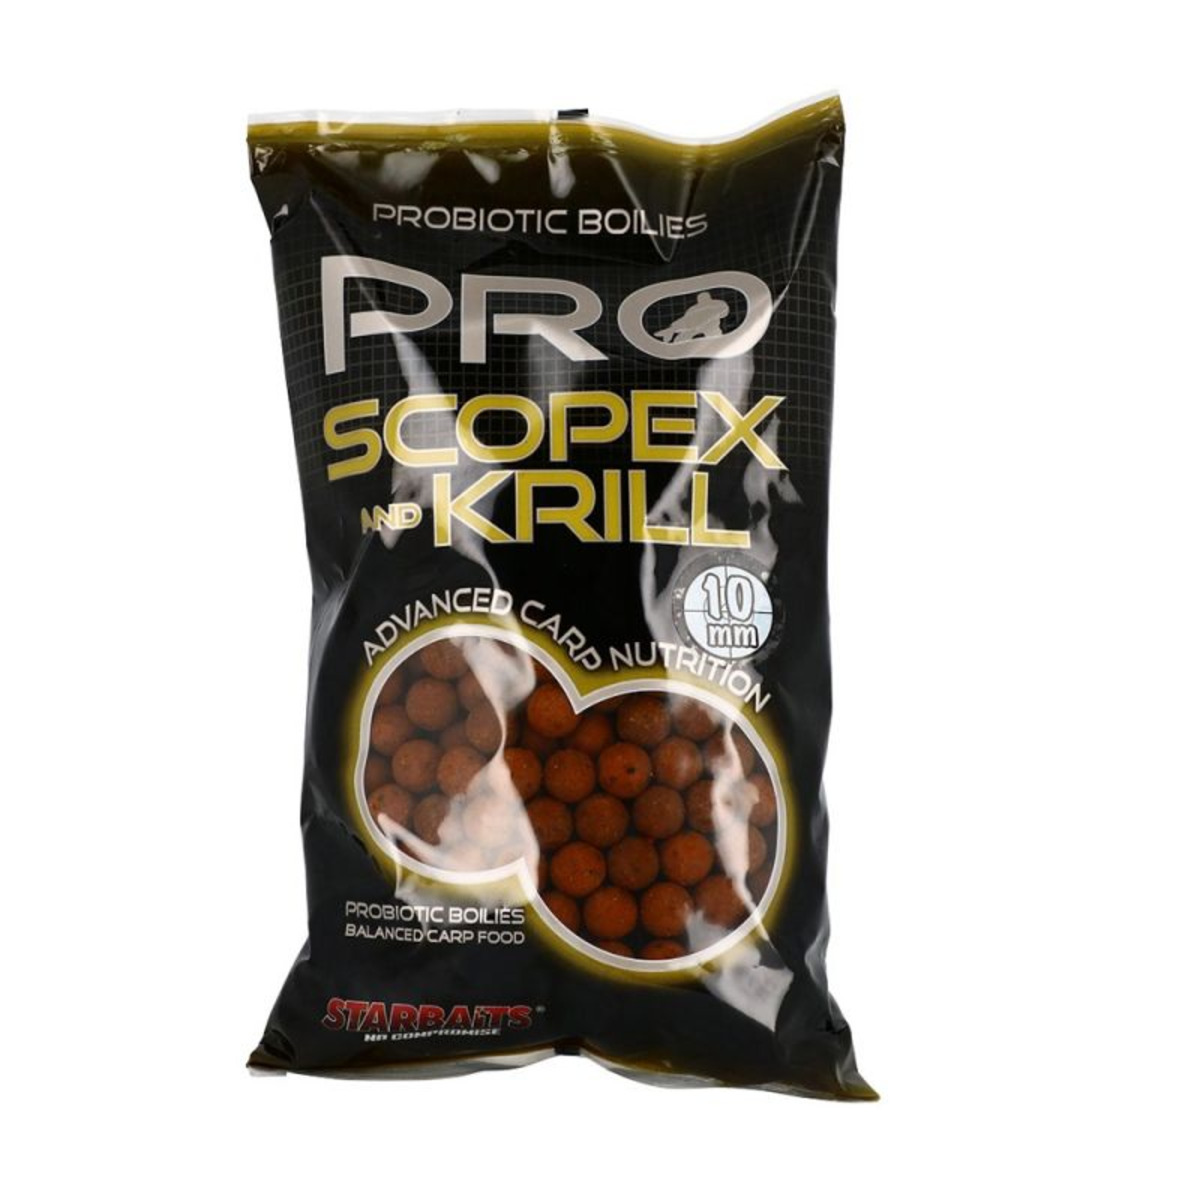 Starbaits Probio Scopex and Krill Boilies - 10 mm - 1 kg